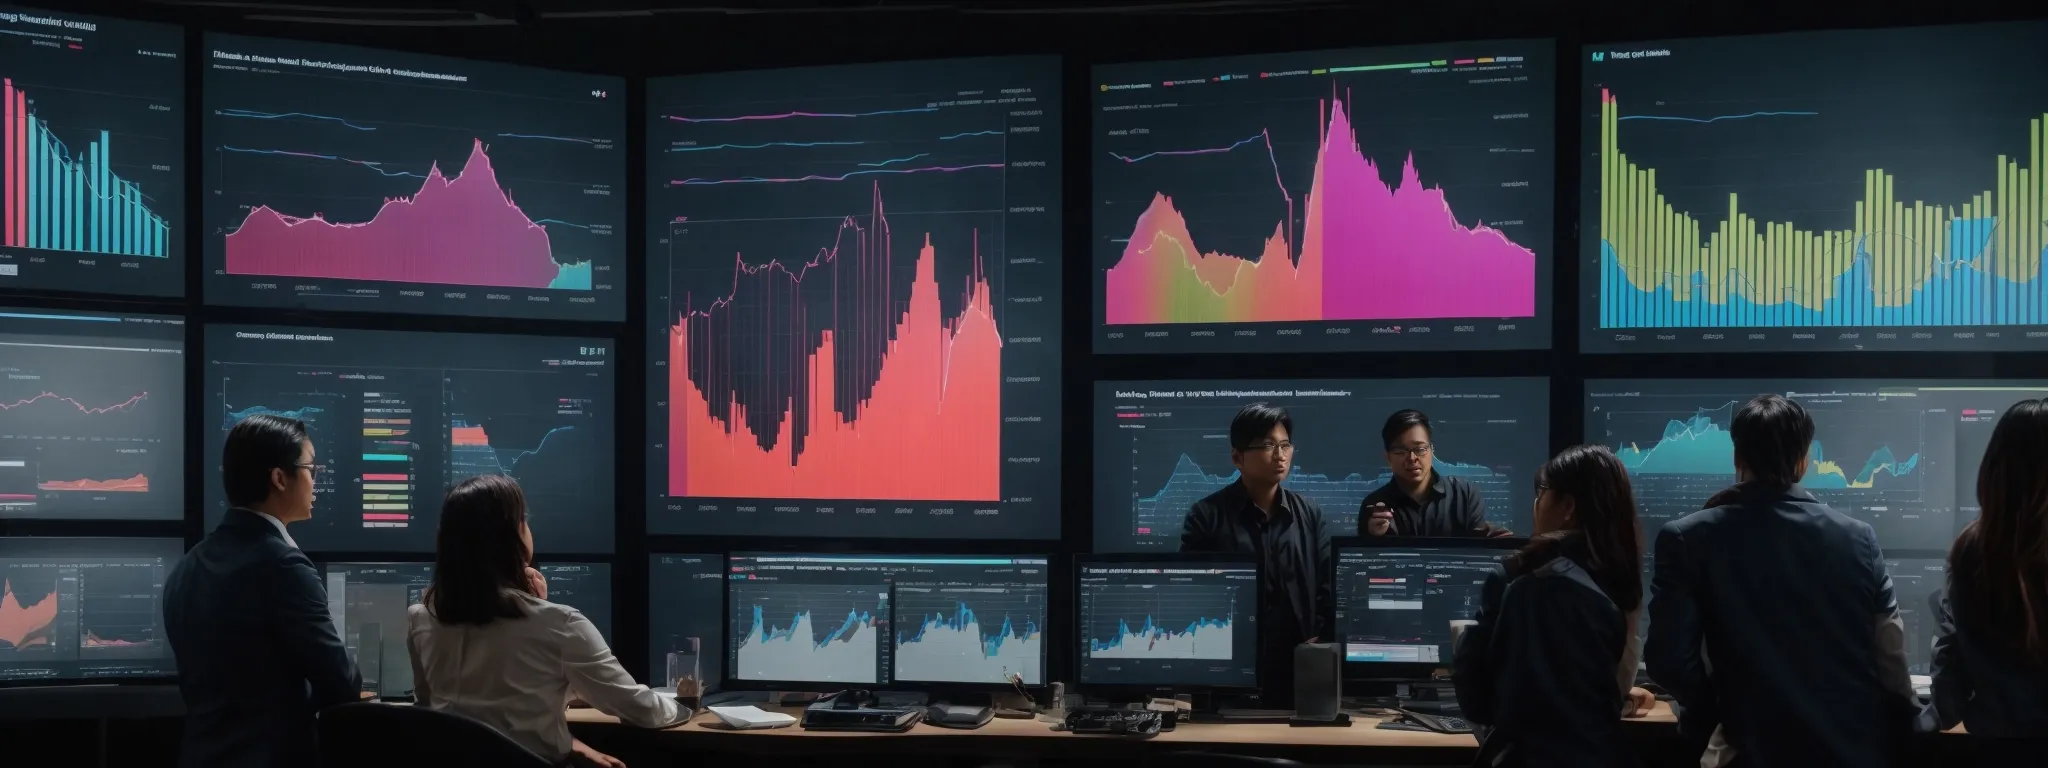 a digital marketing team reviews analytics on a large screen displaying colorful graphs and charts, signifying enhanced a/b testing capabilities.